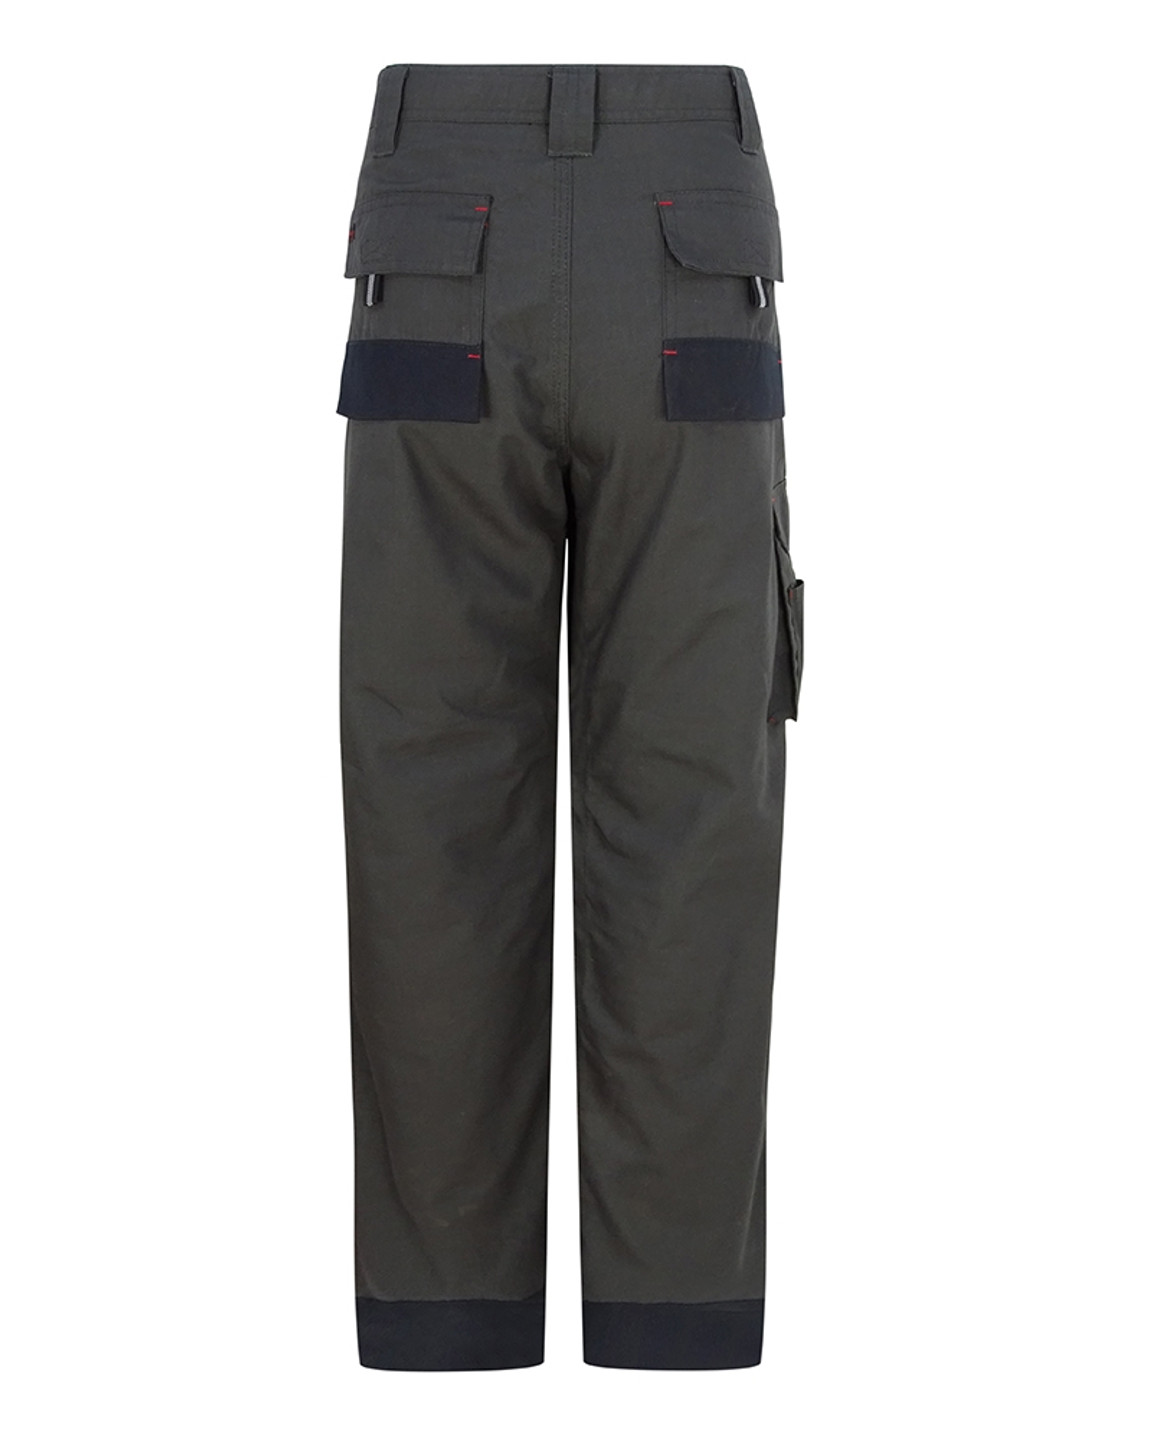 Hoggs of Fife Granite Active Ripstop Thermal Trousers